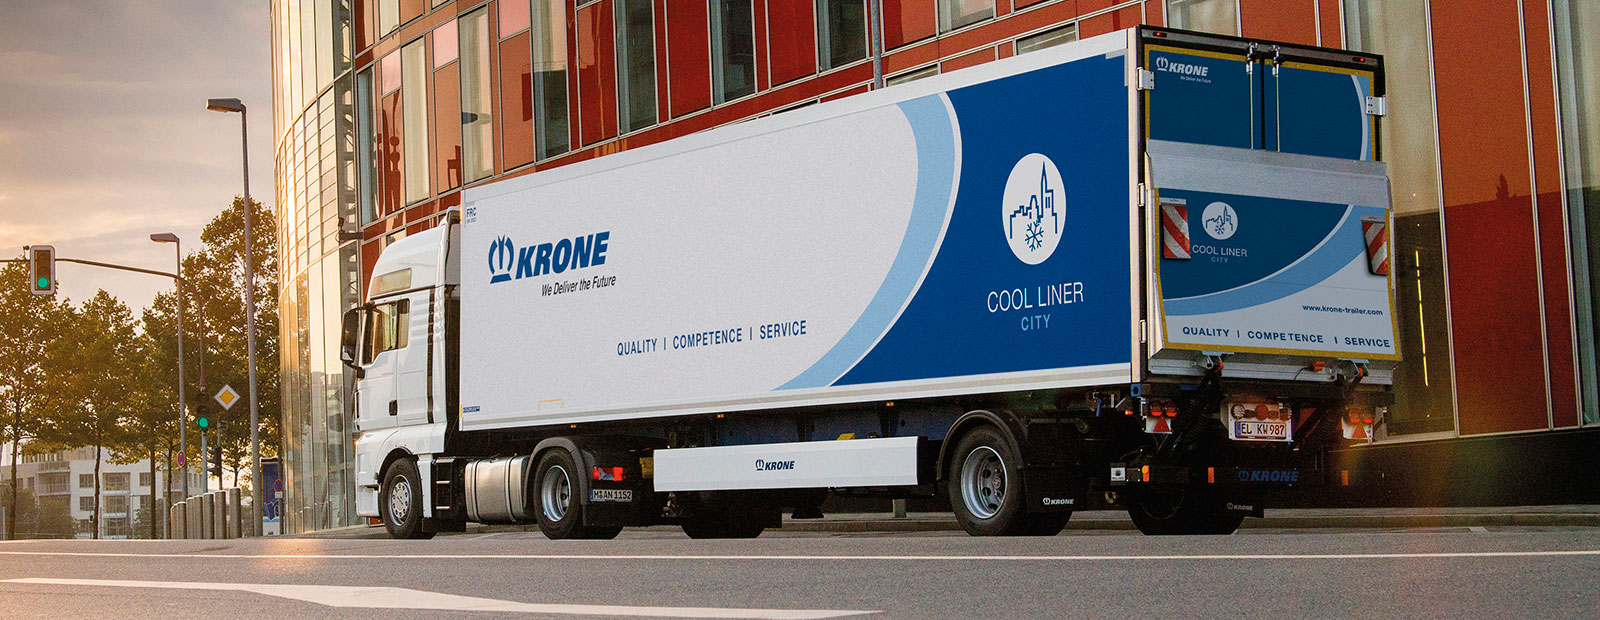 Krone Cool Liner City